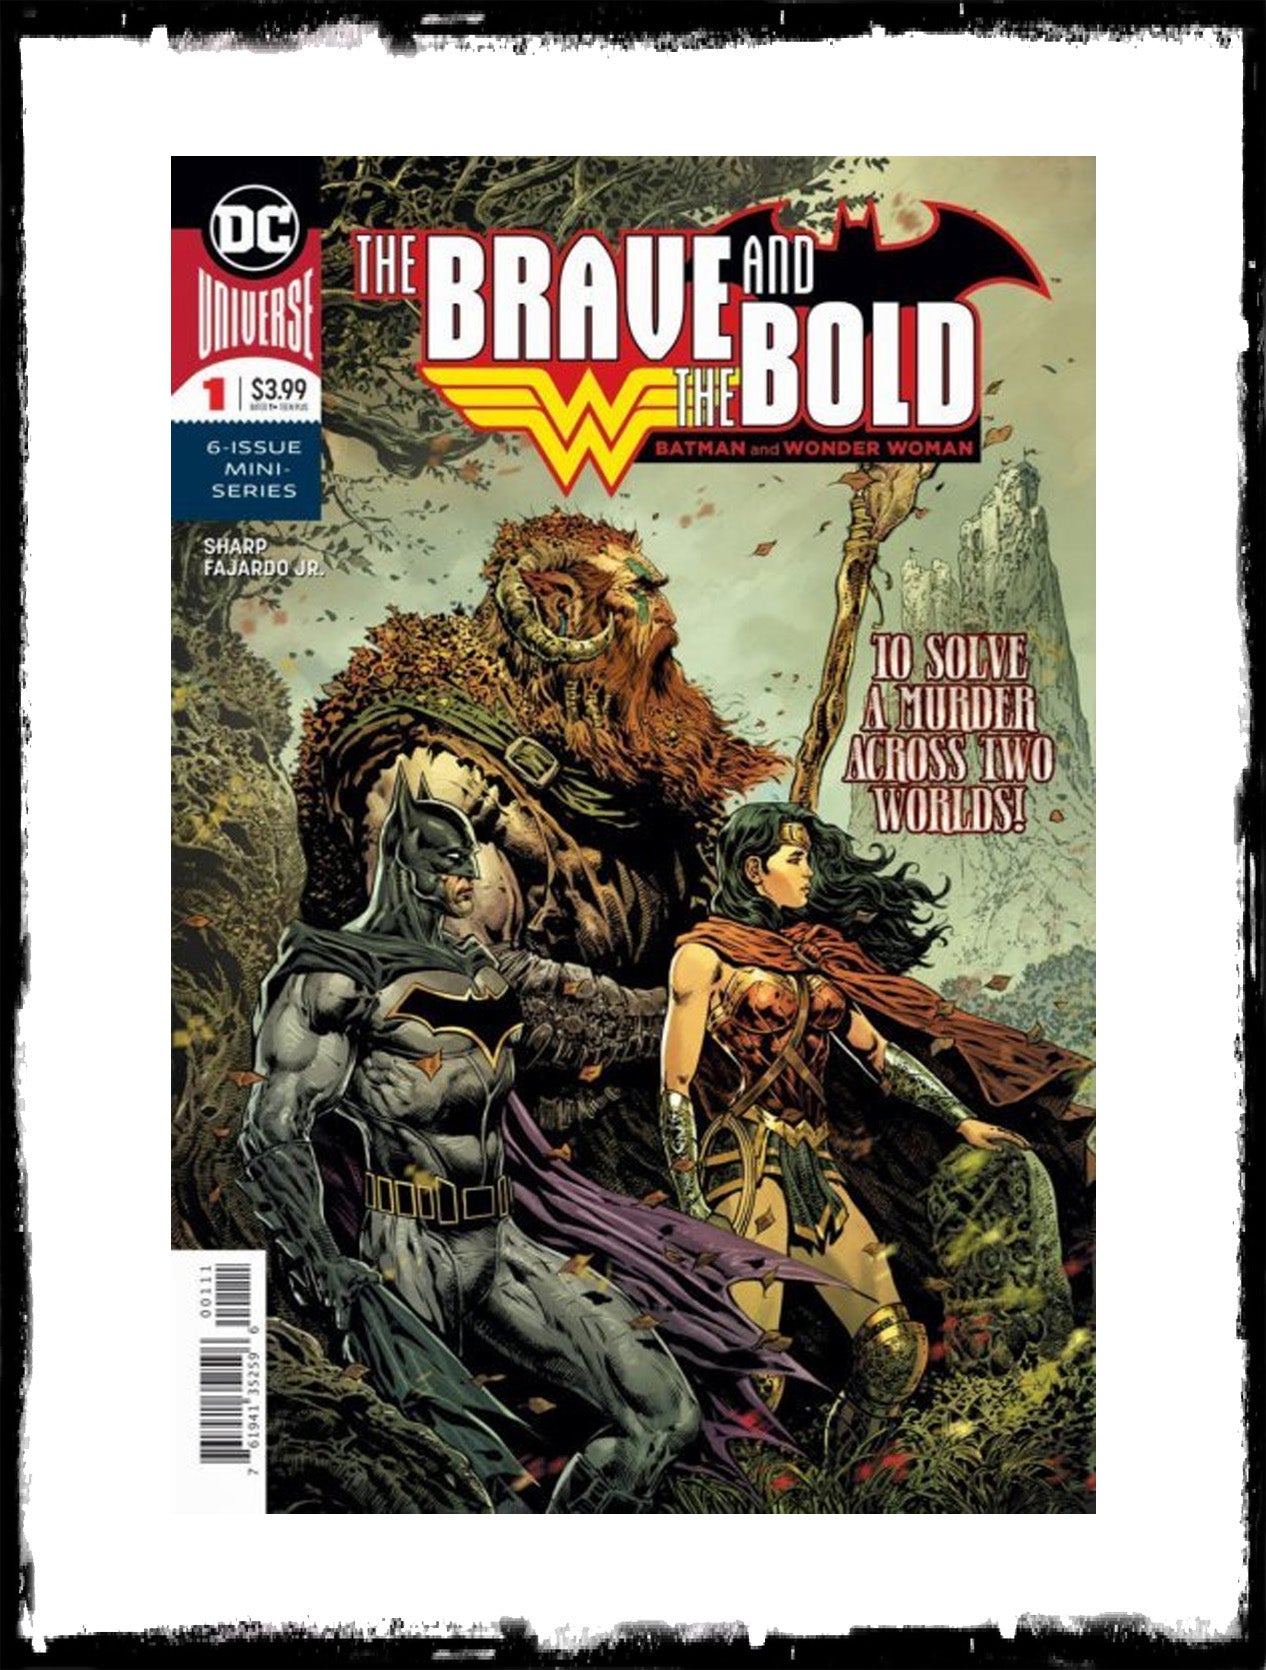 BRAVE AND THE BOLD: BATMAN AND WONDER WOMAN - #1 (2018 - CONDITION NM)